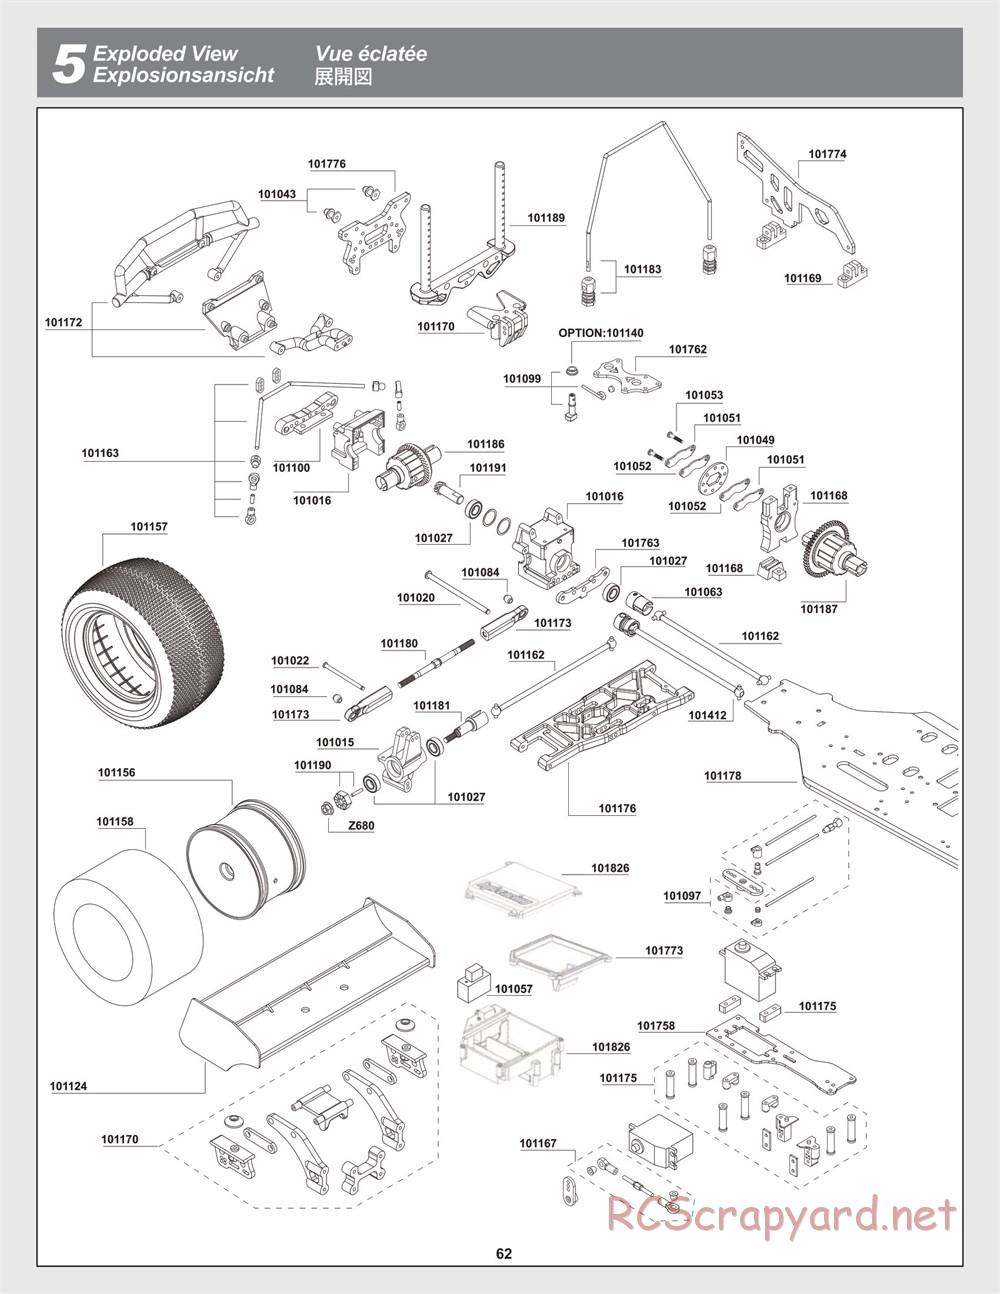 HPI - Trophy 4.6 Truggy - Exploded View - Page 62